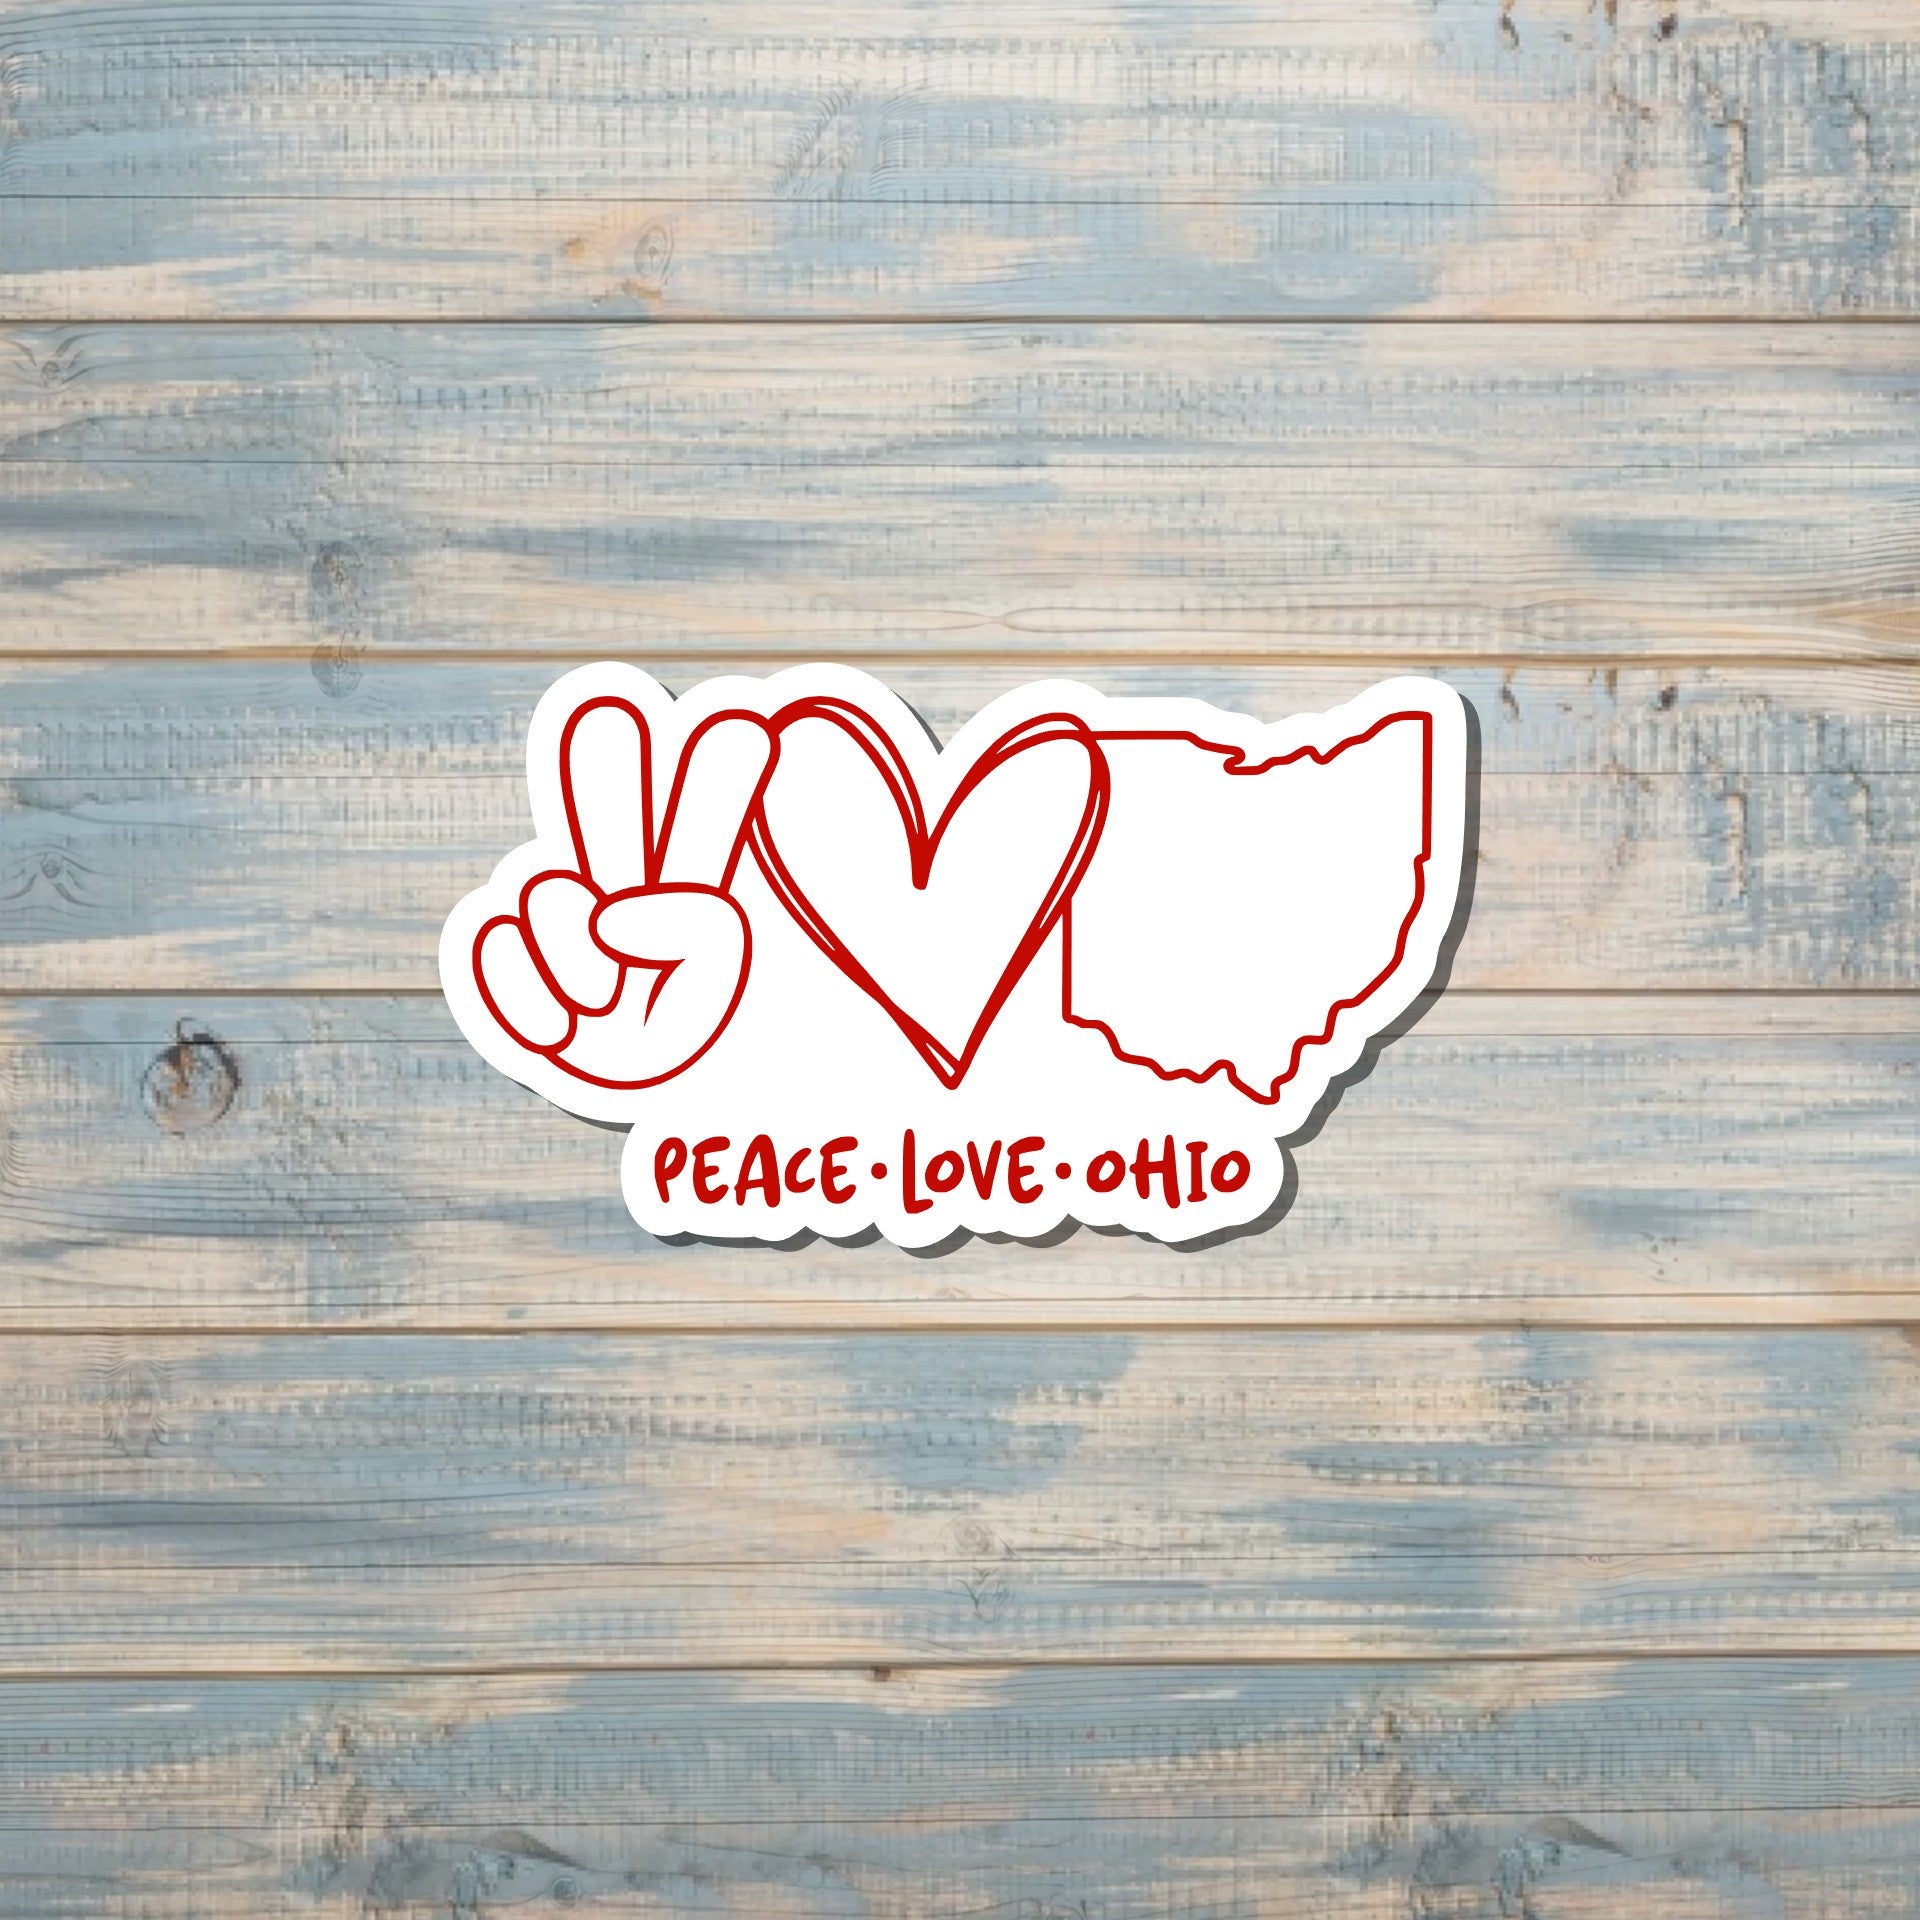 Peace Love Ohio Sticker, Ohio State Decal, State Laptop Stickers, Vinyl Stickers, Home Pride, Refrigerator Magnet, Locker Hometown, OH USA Outline, Red Saying Quote or Magnet | Handmade by